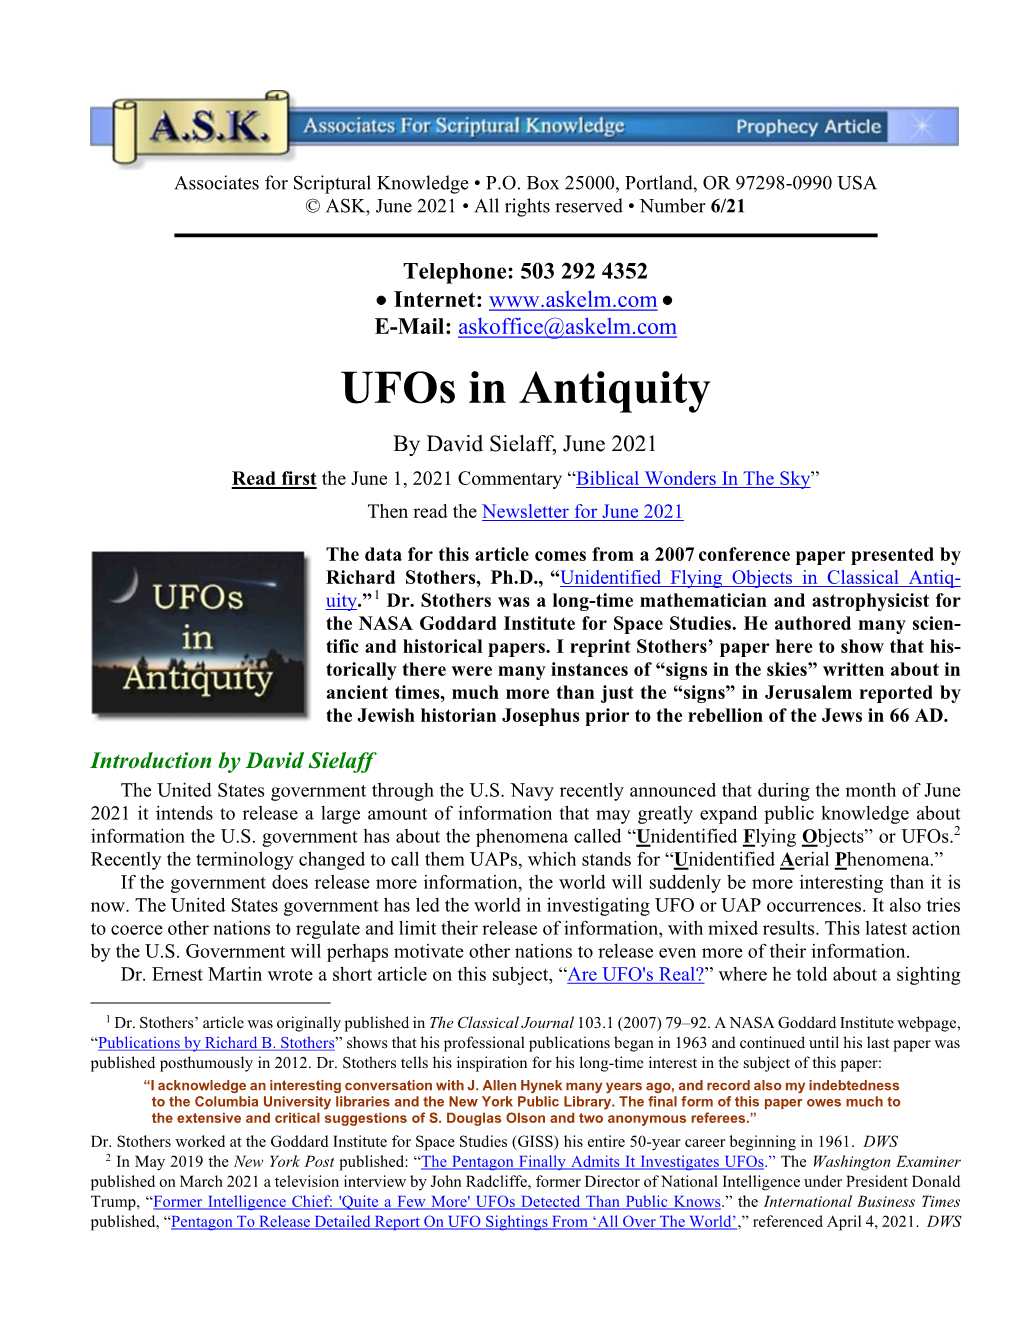 Ufos in Antiquity by David Sielaff, June 2021 Read First the June 1, 2021 Commentary “Biblical Wonders in the Sky” Then Read the Newsletter for June 2021